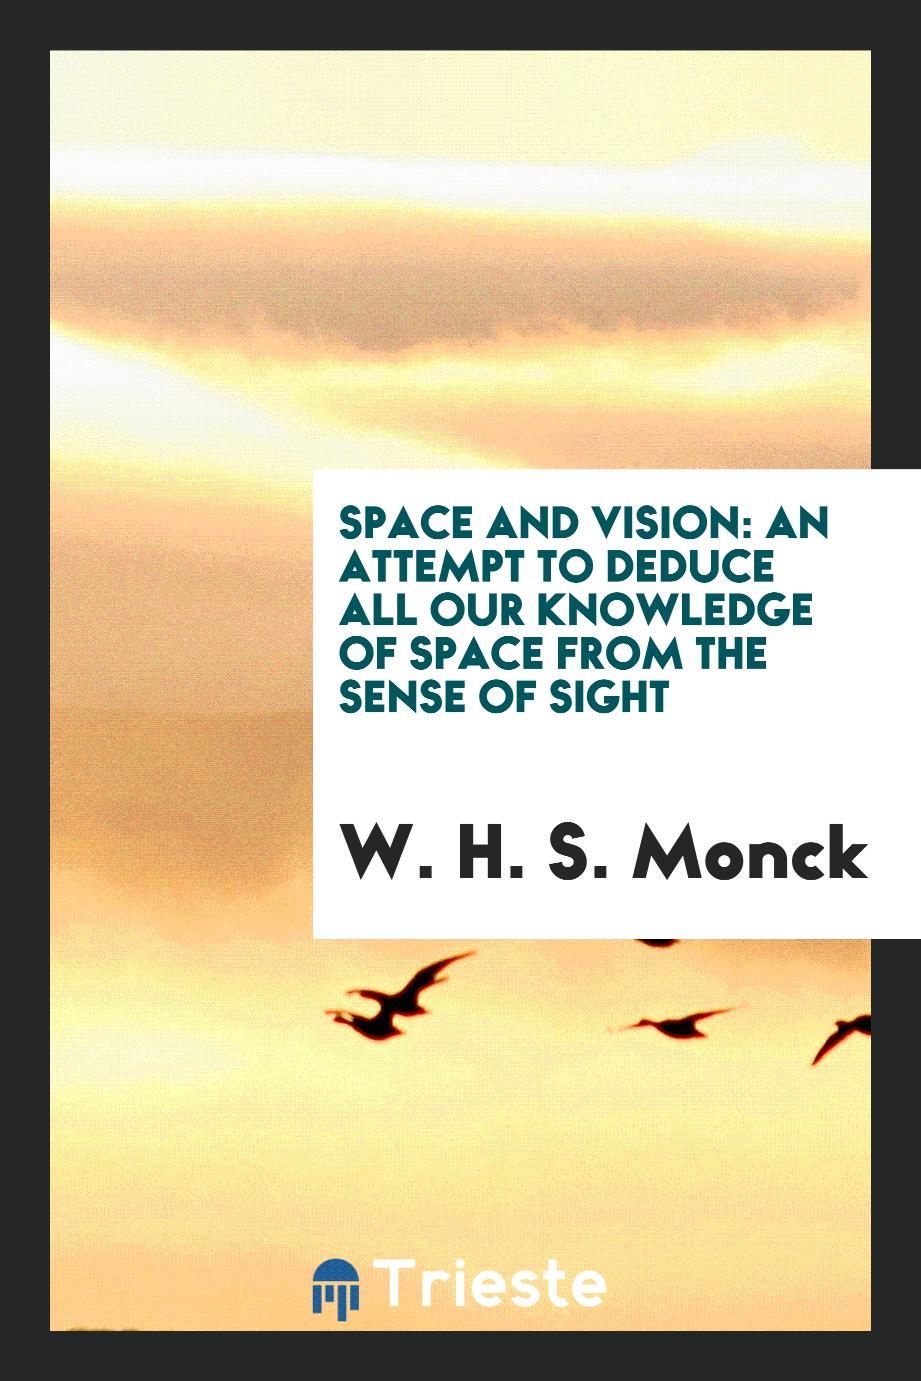 Space and Vision: An Attempt to Deduce All Our Knowledge of Space from the Sense of Sight